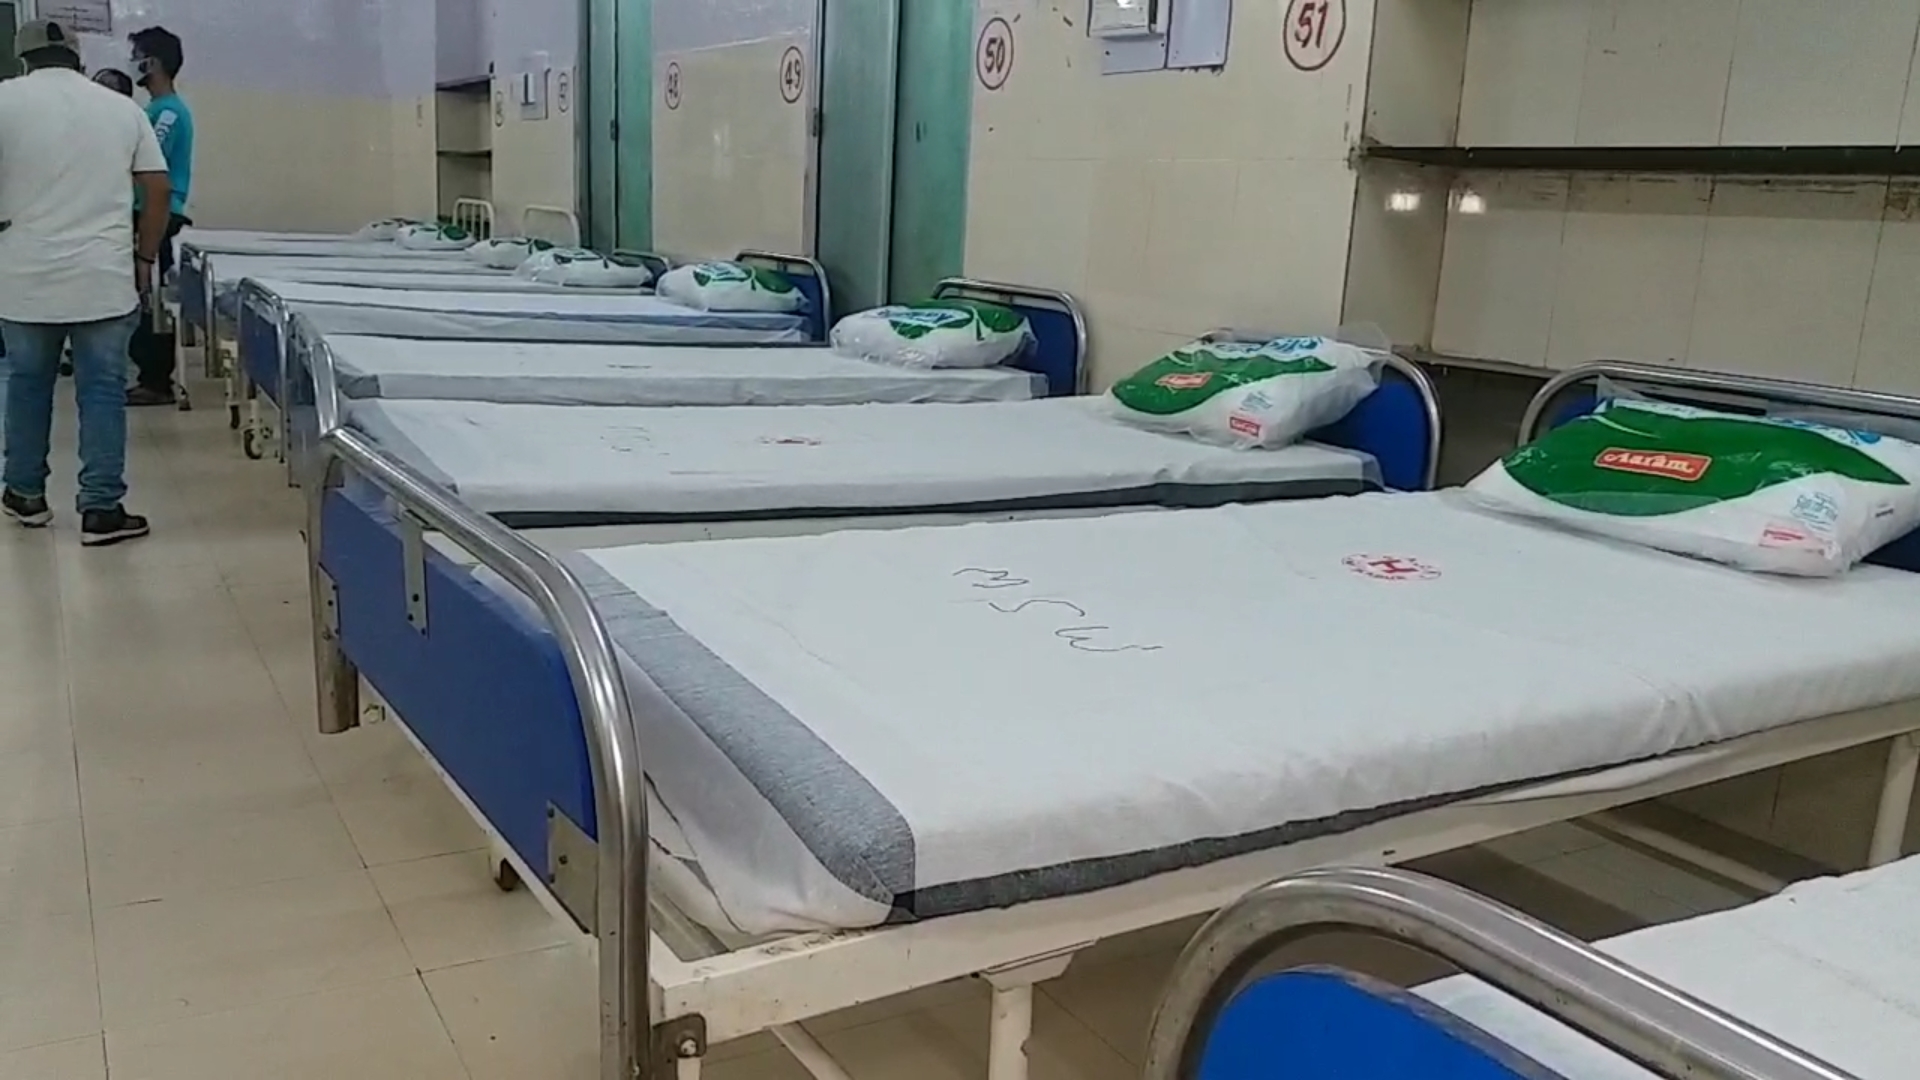 22 patients of Corona found in Balrampur